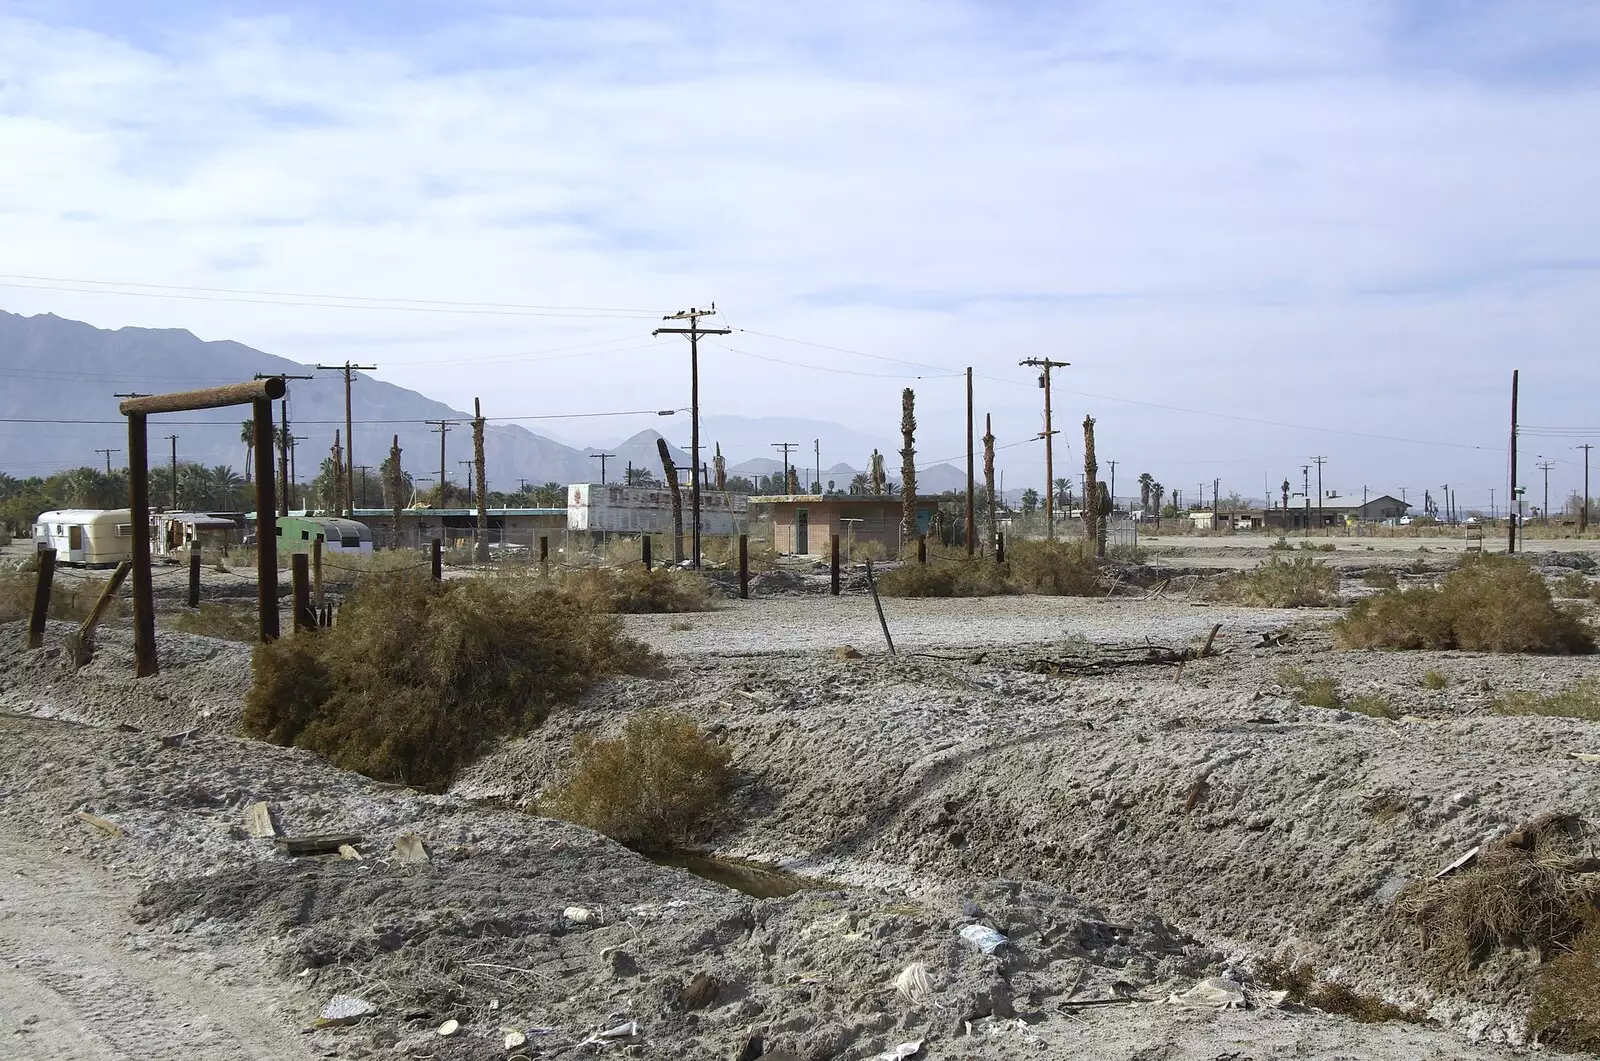 The nuclear blast-wave has not left much behind, from The End of the World: Julian to the Salton Sea and Back, California, US - 1st March 2008